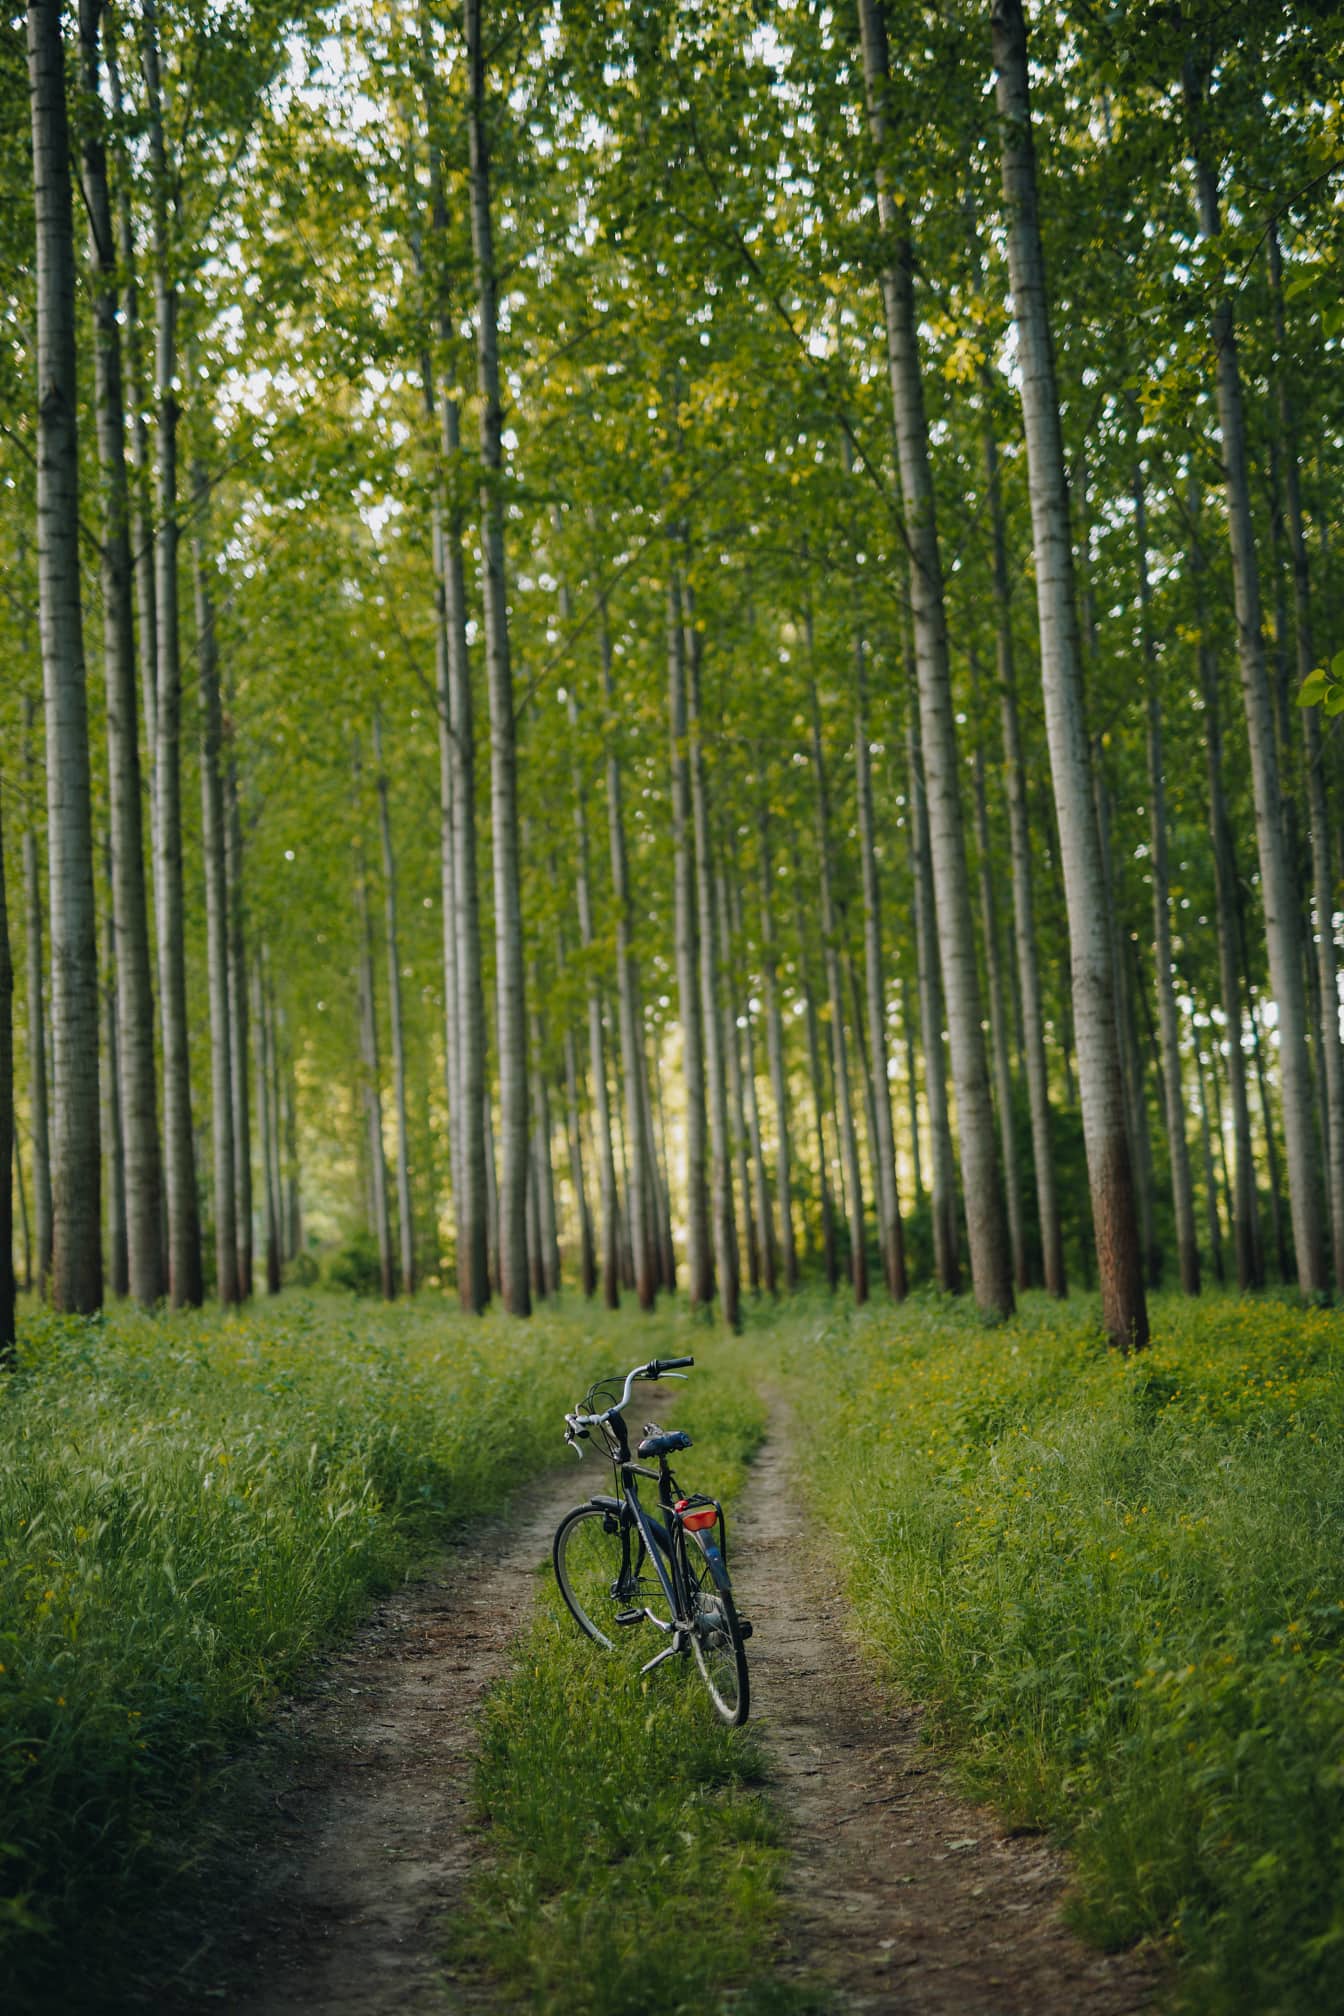 Black bicycle on forest path in poplar woodland